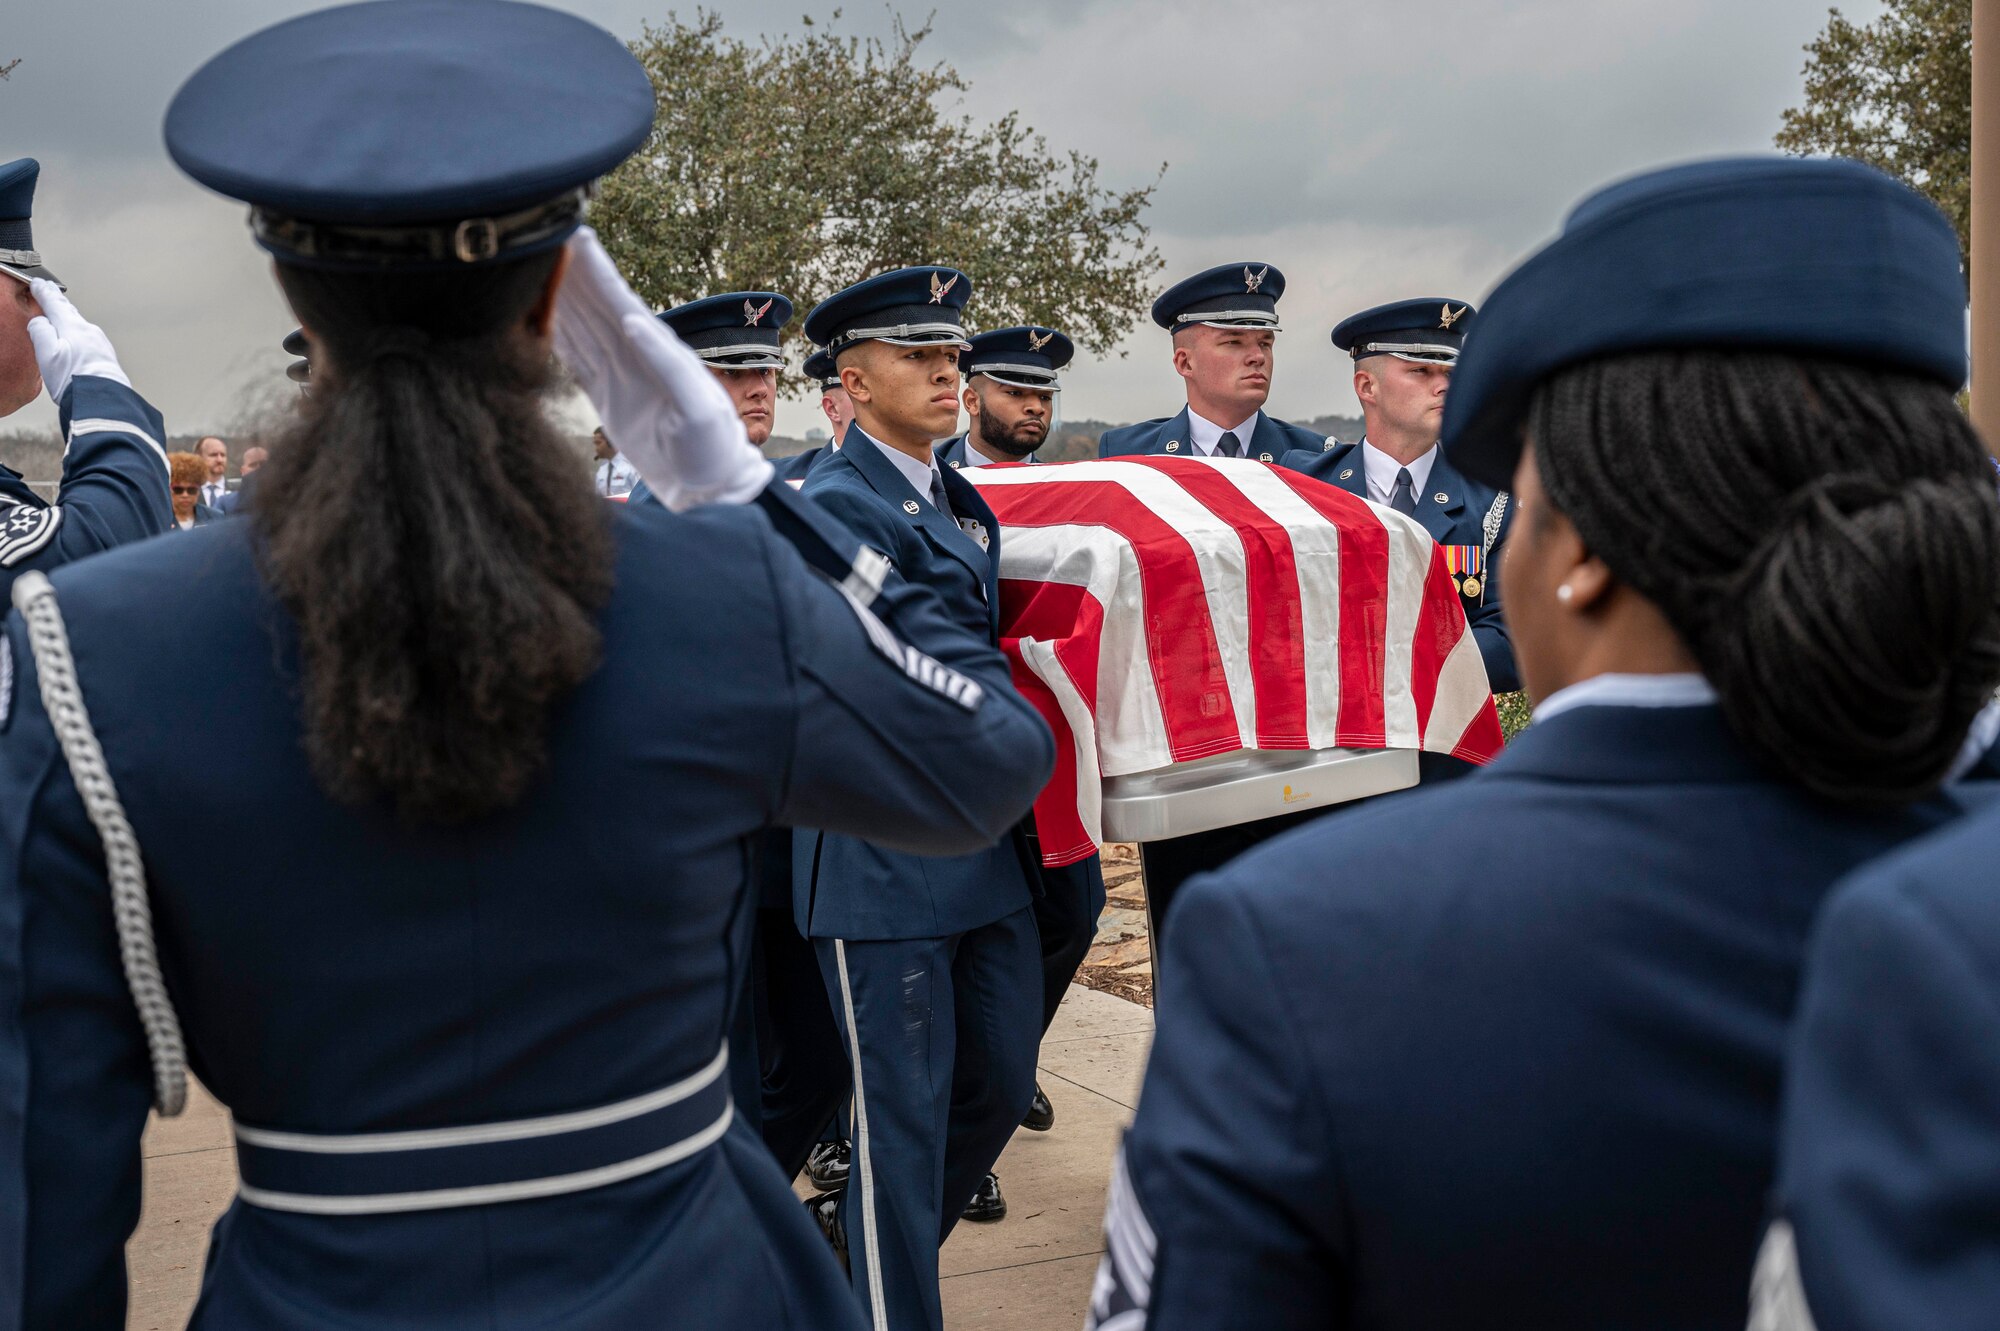 Soldiers with the Fort Sam Houston Caisson Section carry the flag-draped casket of fifth Chief Master Sgt. of the Air Force Robert D. Gaylor during his interment ceremony, Feb. 10, 2024 at Fort Sam Houston National Cemetery, Texas. Gaylor spent more than seven decades improving the Air Force through its people. He was an active proponent of professional military education and delivered seminars frequently in-person and online until his passing. (U.S. Air Force photo by Tristin English).